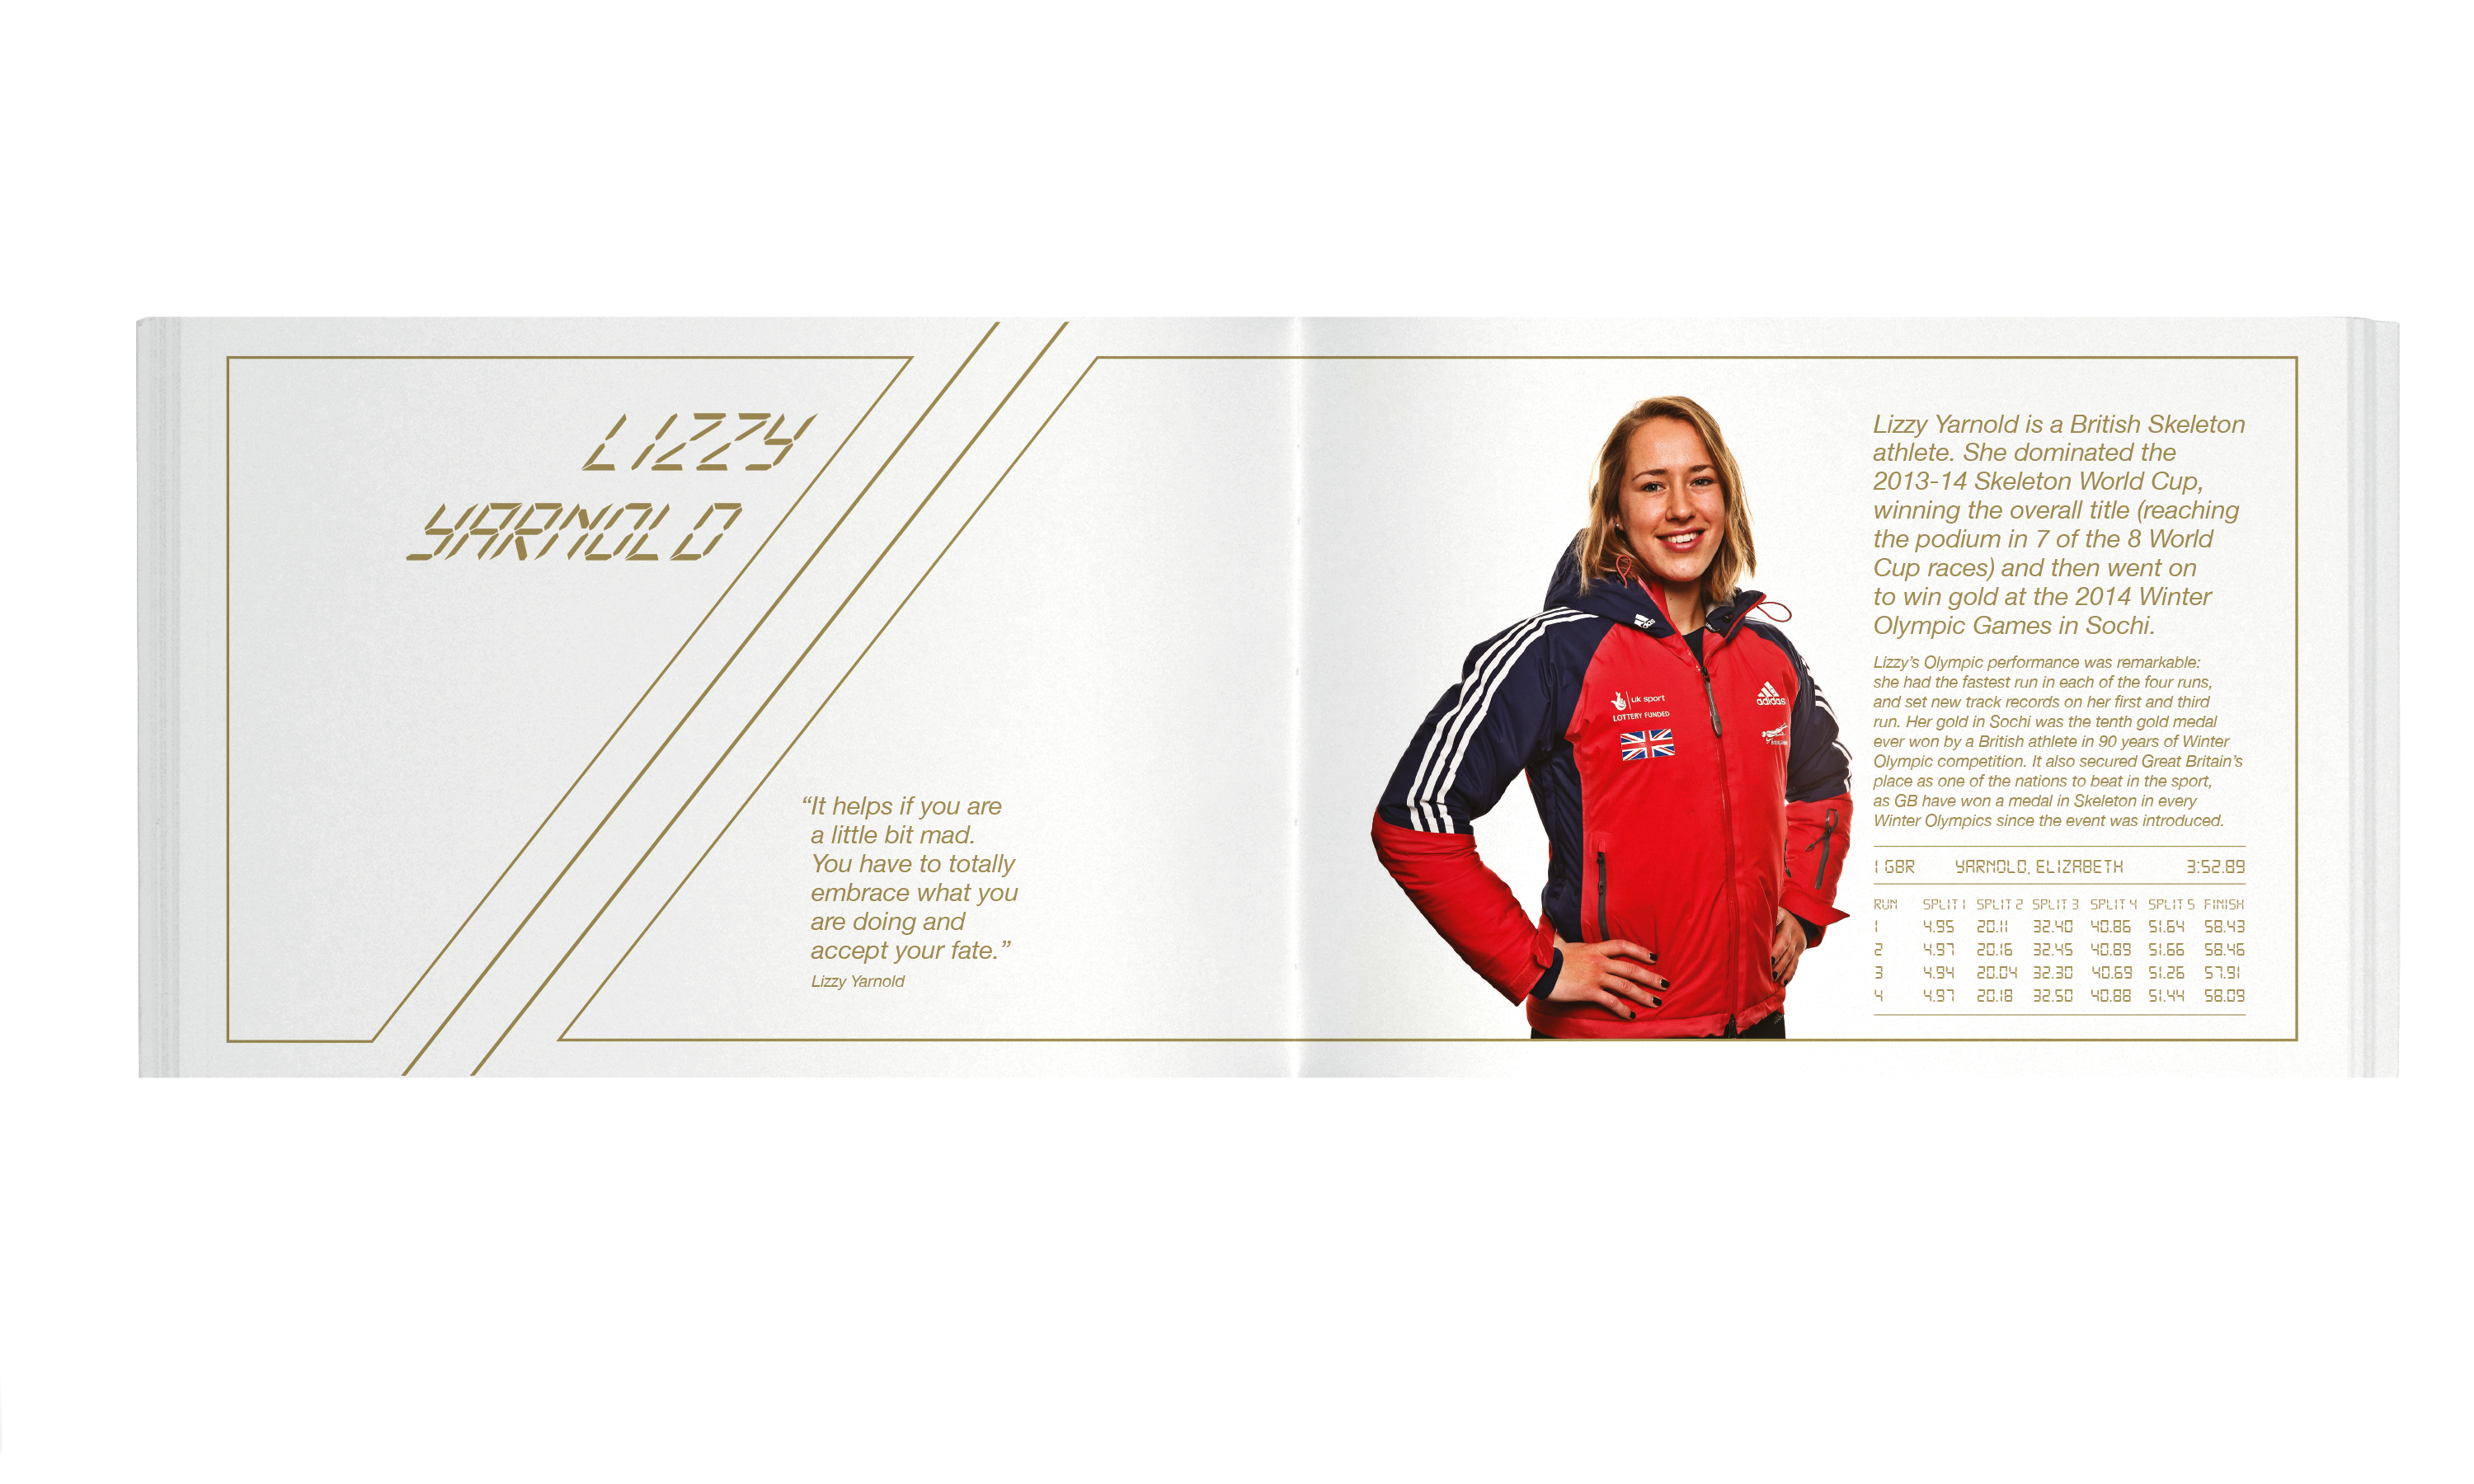 The opening spread of the Lizzy Yarnold story by Neon Design & Branding Consultancy www.neon-creative.com